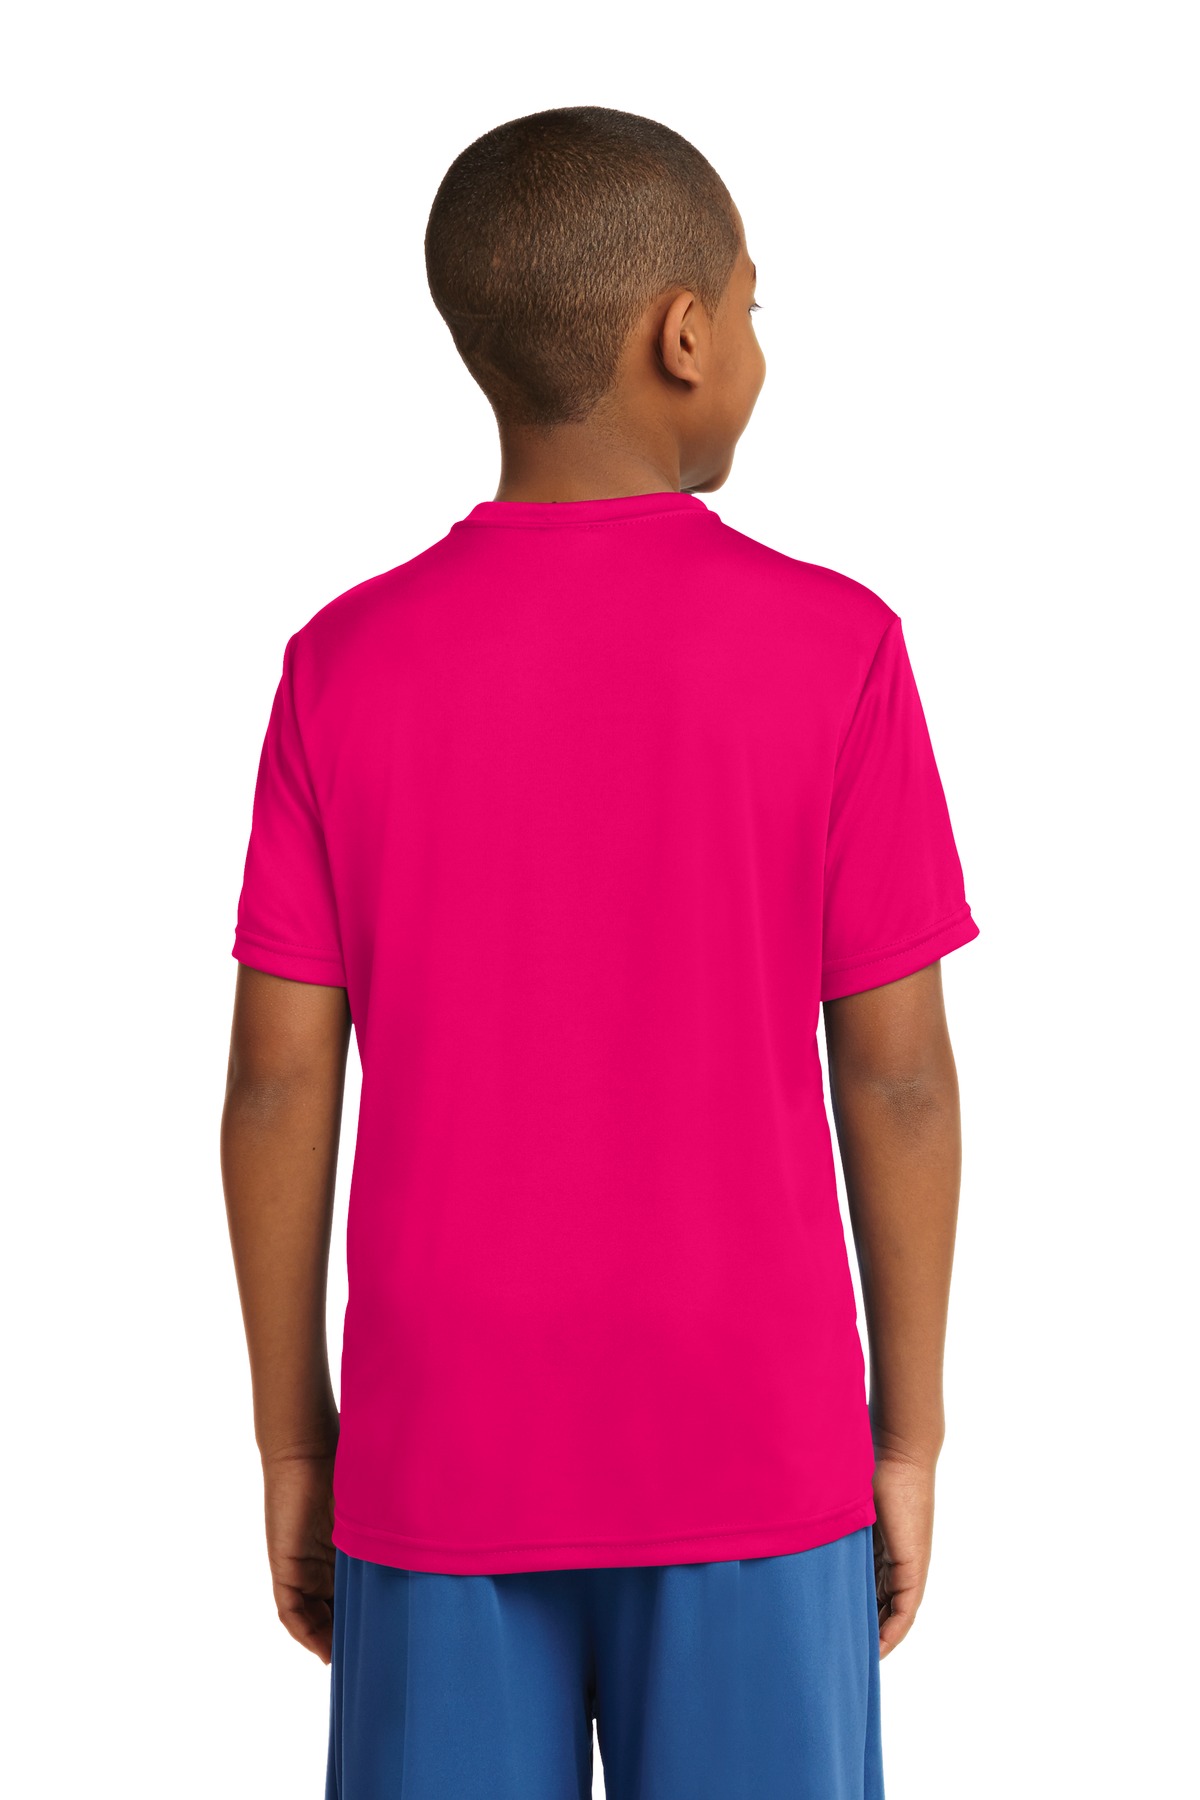 Sport Tek Yst350 Youth Posi Charge Competitor Tee | Jiffy Shirts